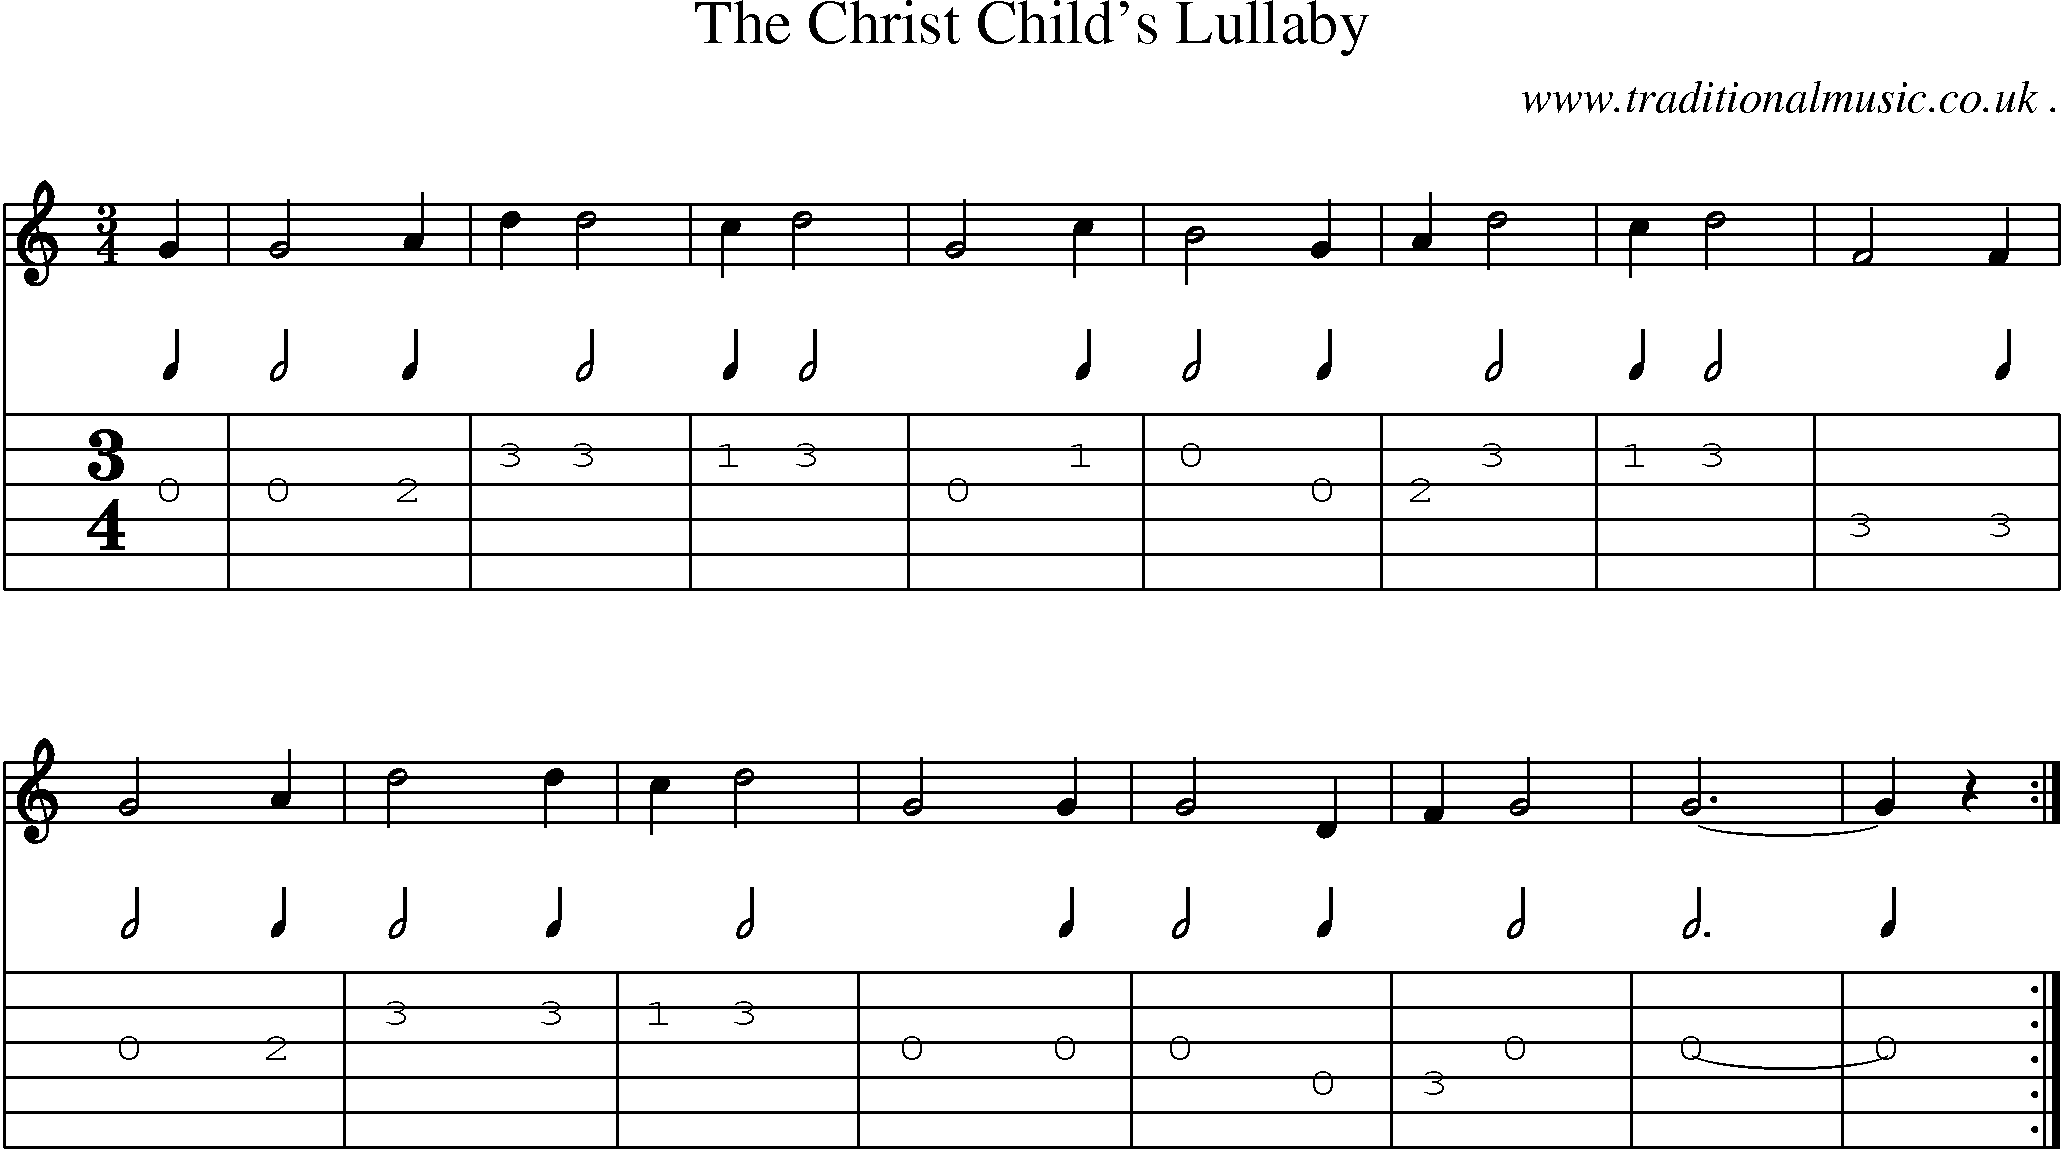 Sheet-music  score, Chords and Guitar Tabs for The Christ Childs Lullaby